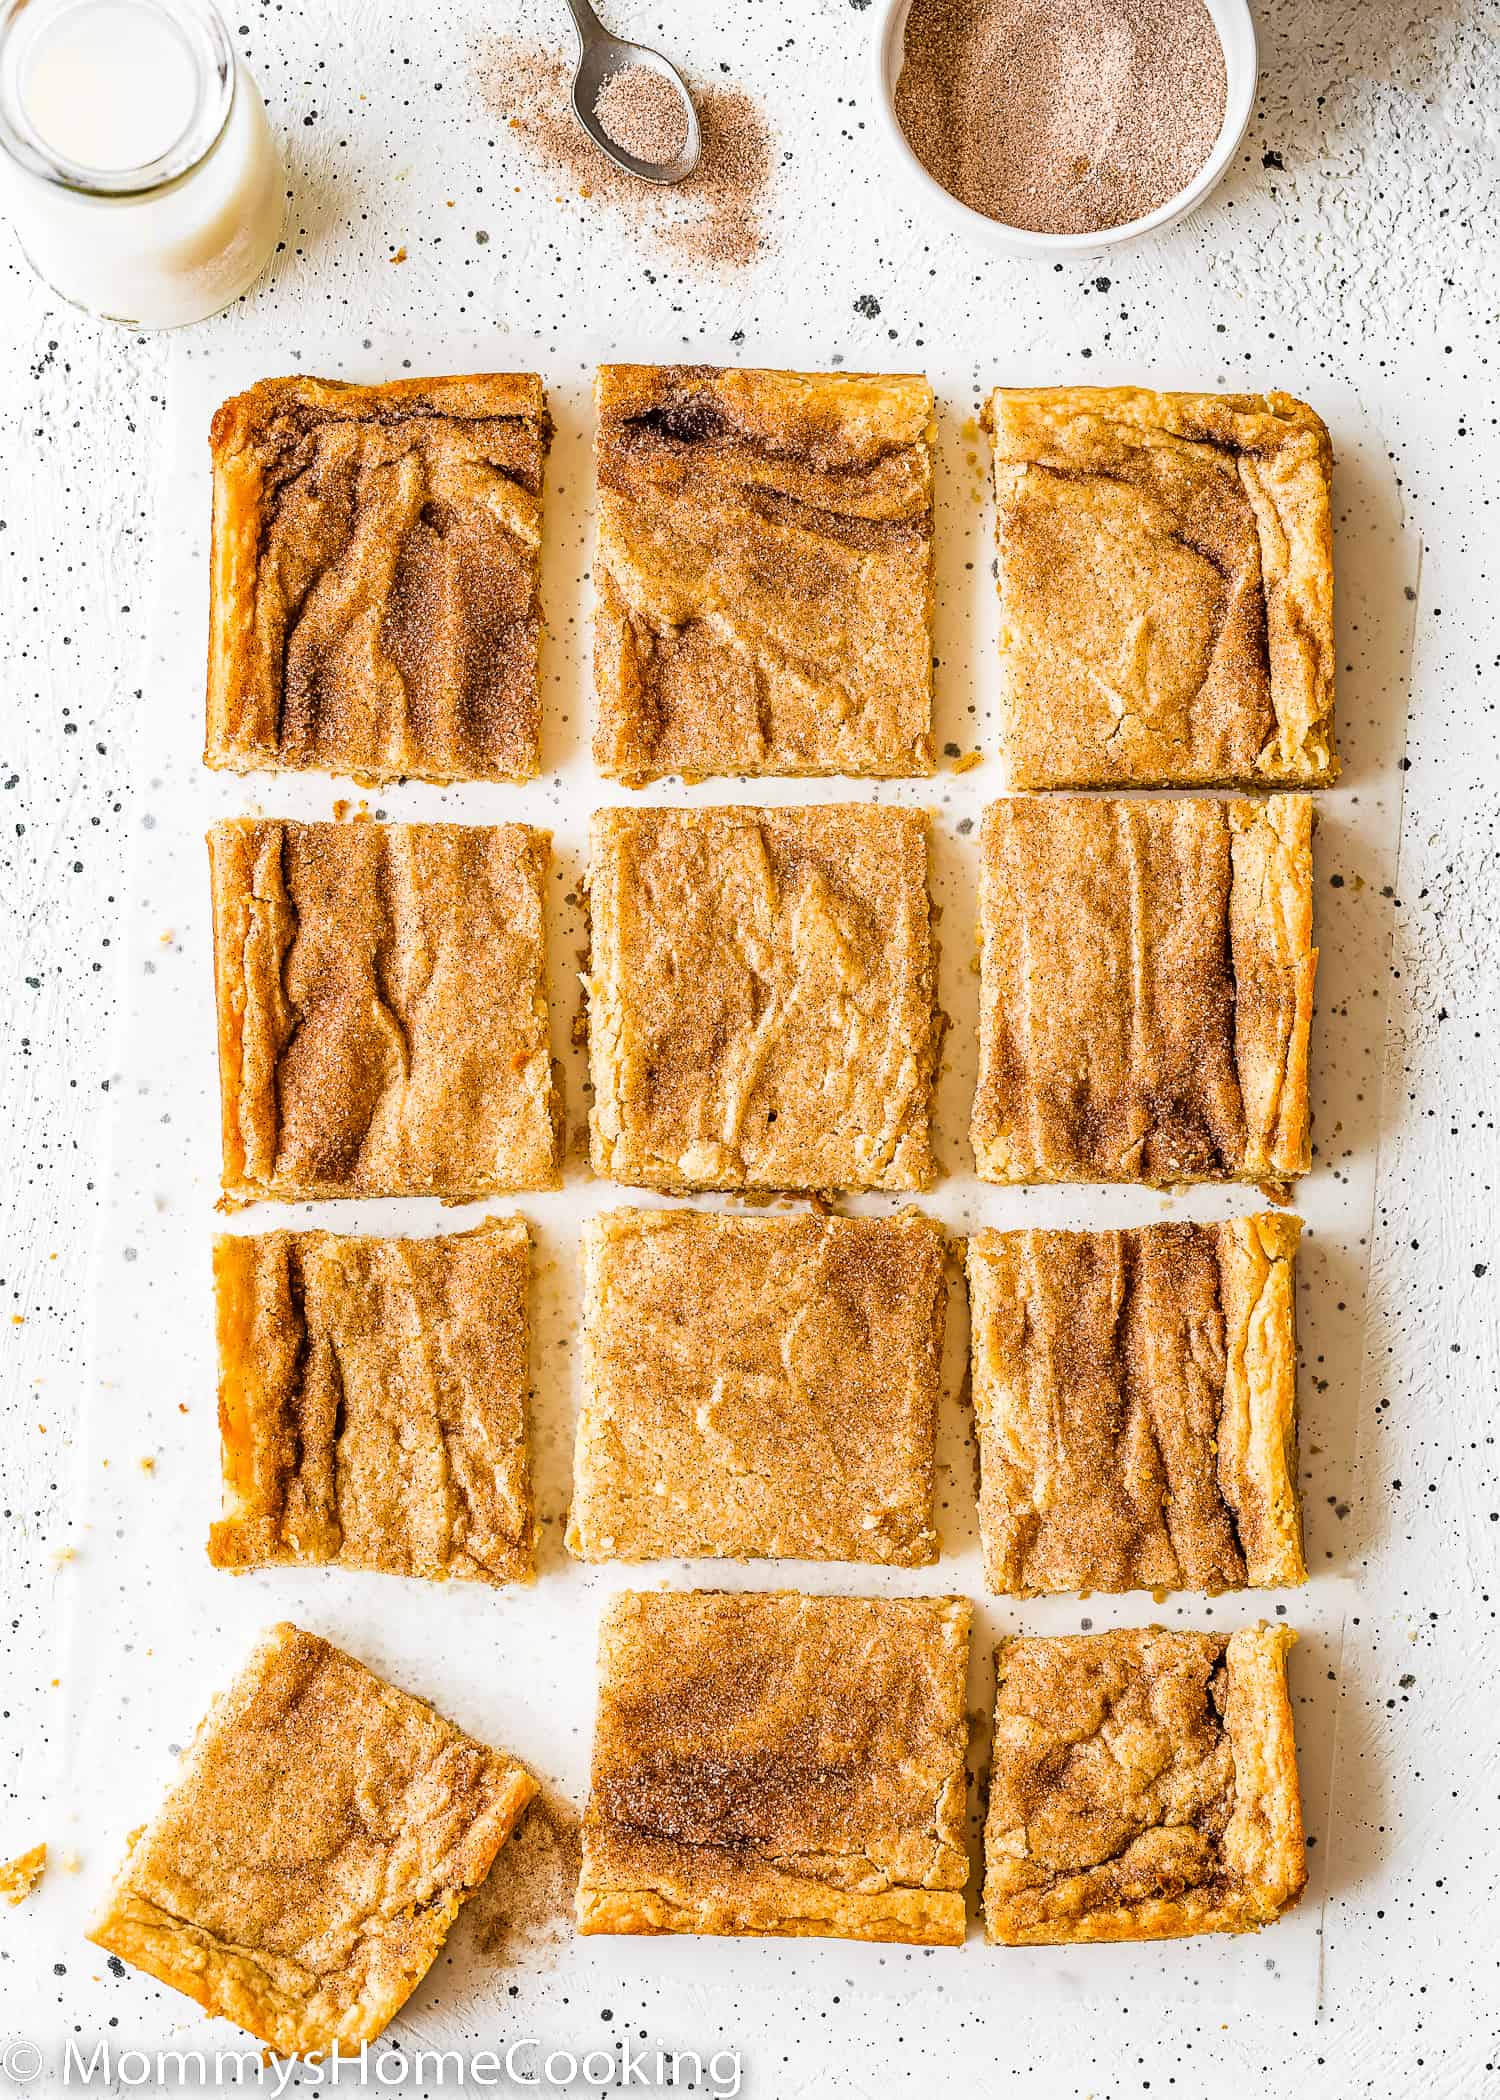 Twelve egg-free Snickerdoodle Bars over a white surface with a bottle of milk on the side and a bowl with cinnamon sugar.